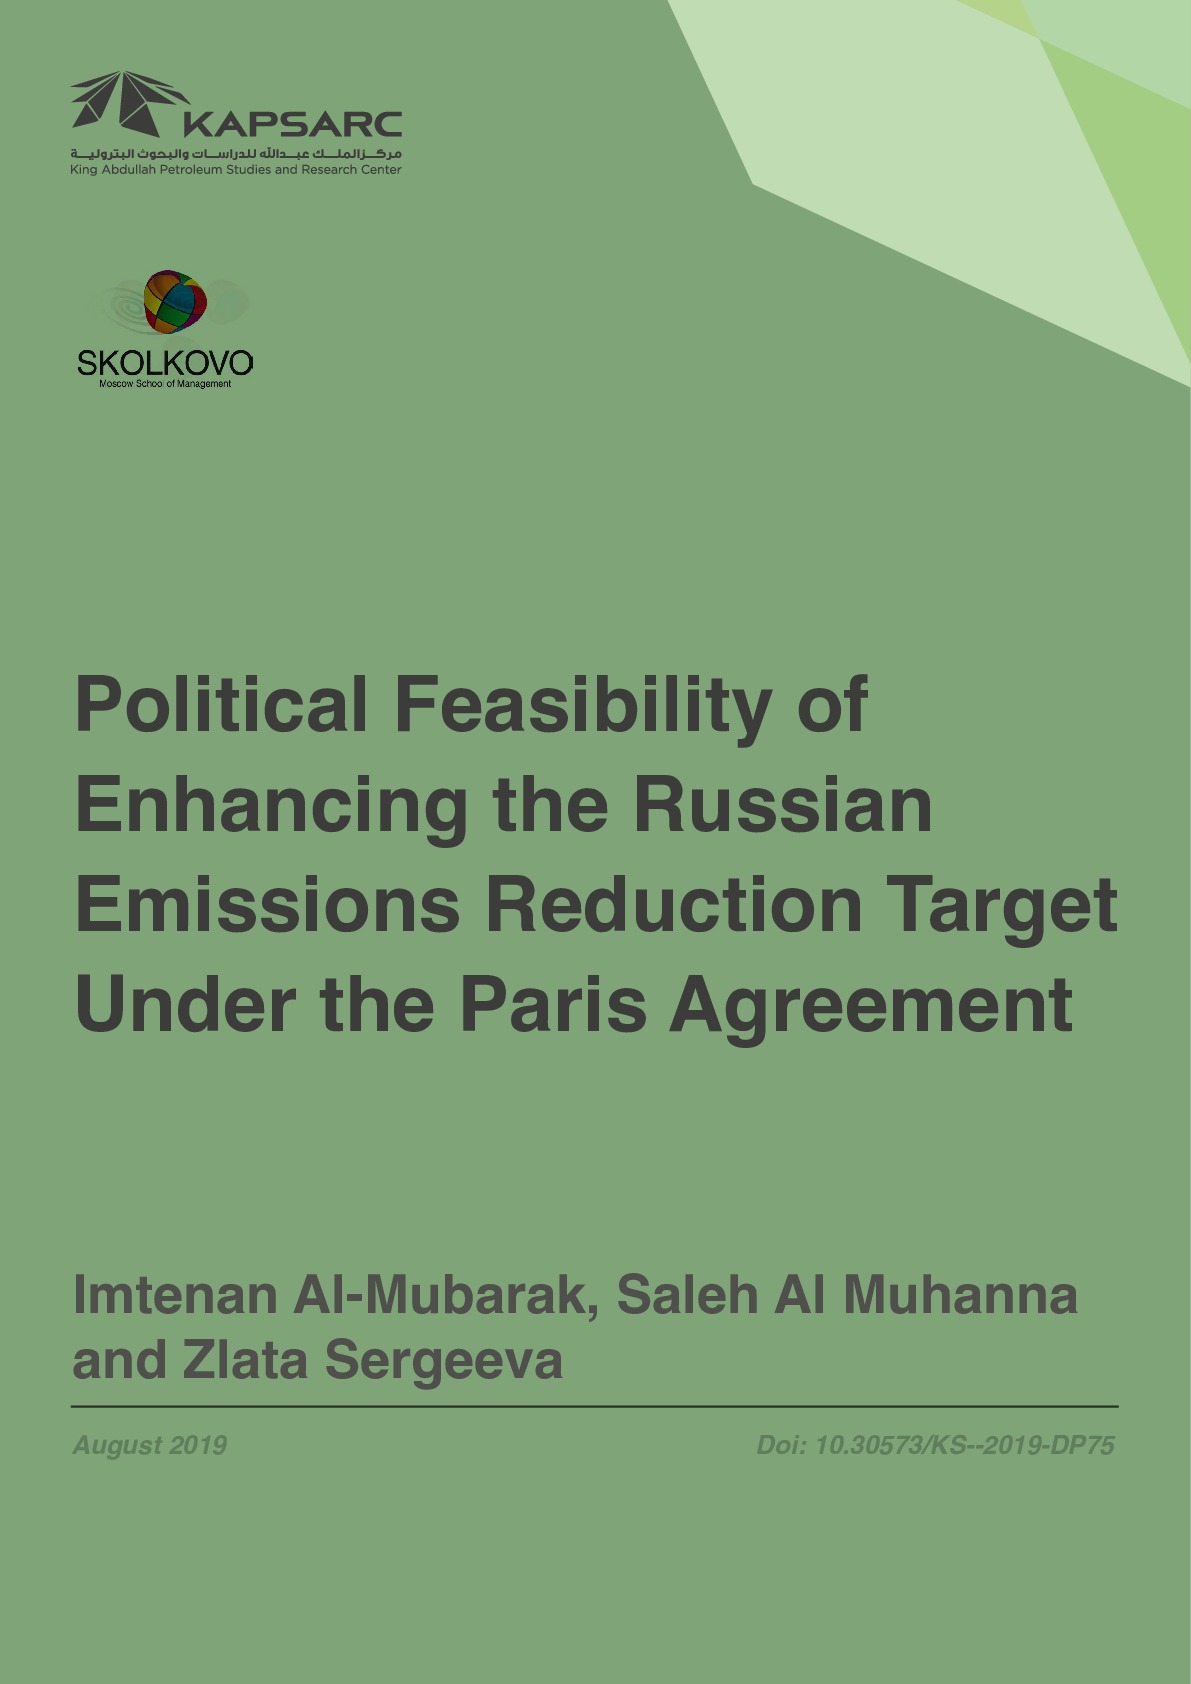 Political Feasibility of Enhancing the Russian Emissions Reduction Target Under the Paris Agreement